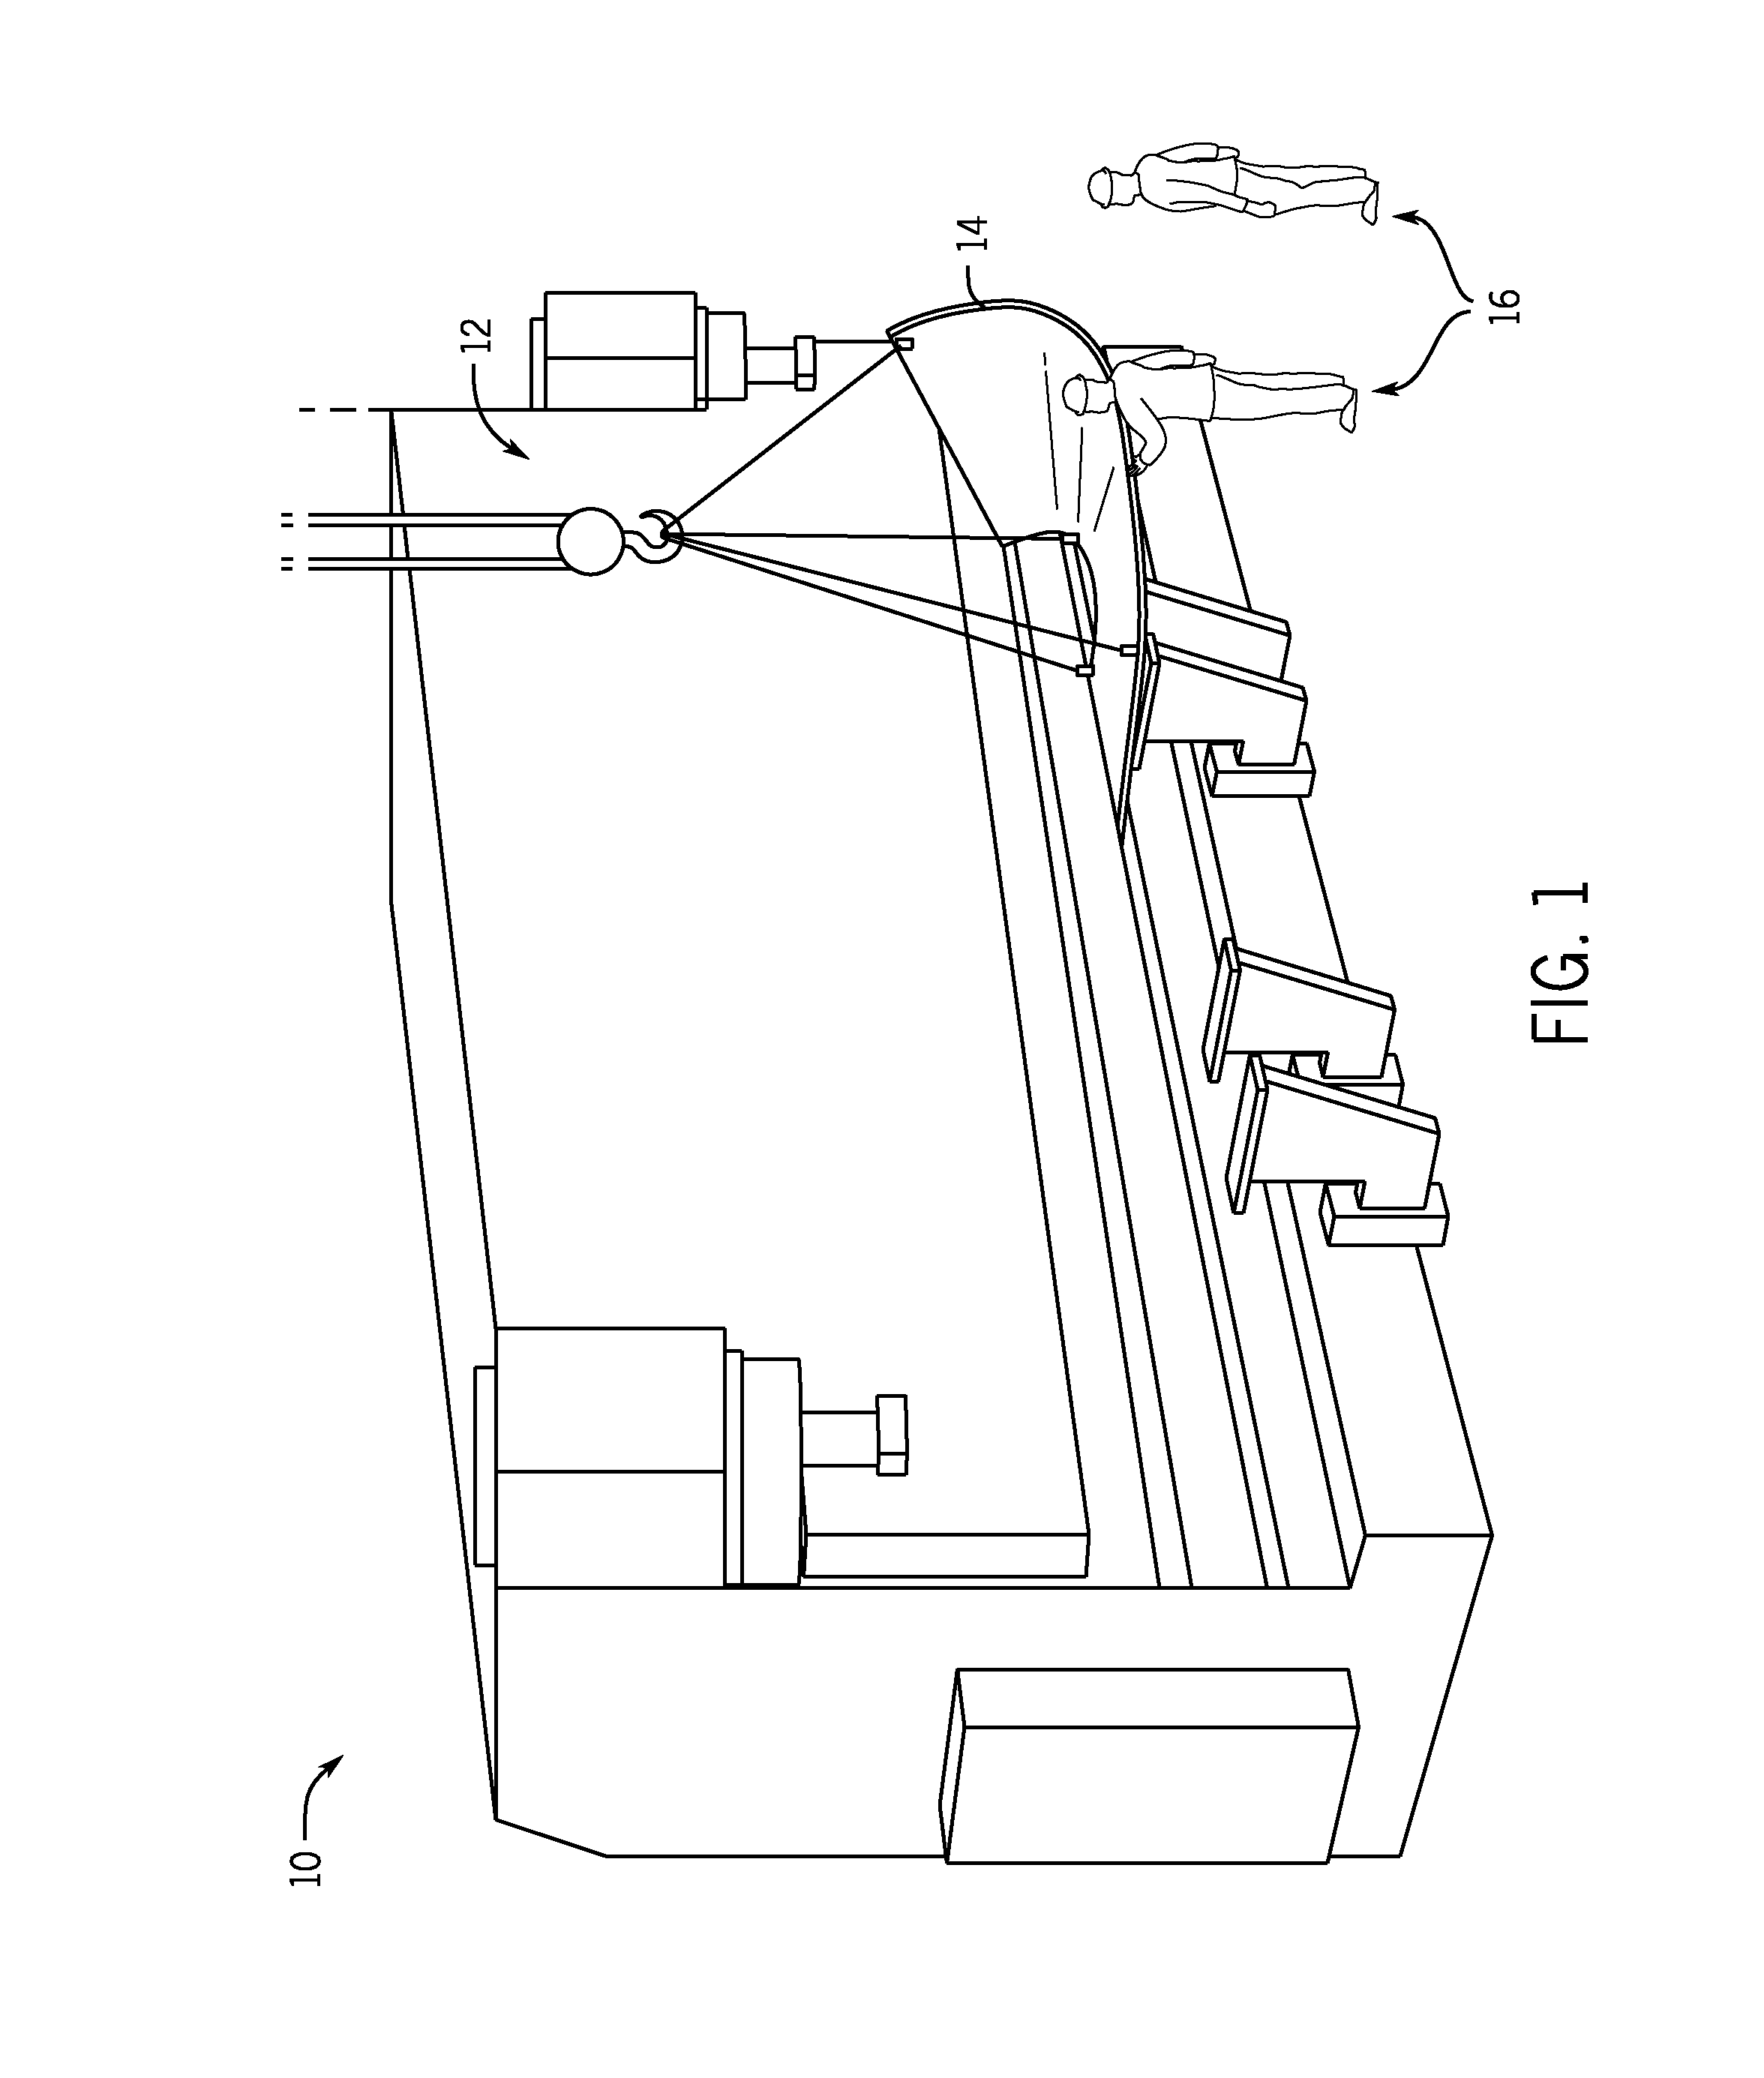 Large scale metal forming control system and method